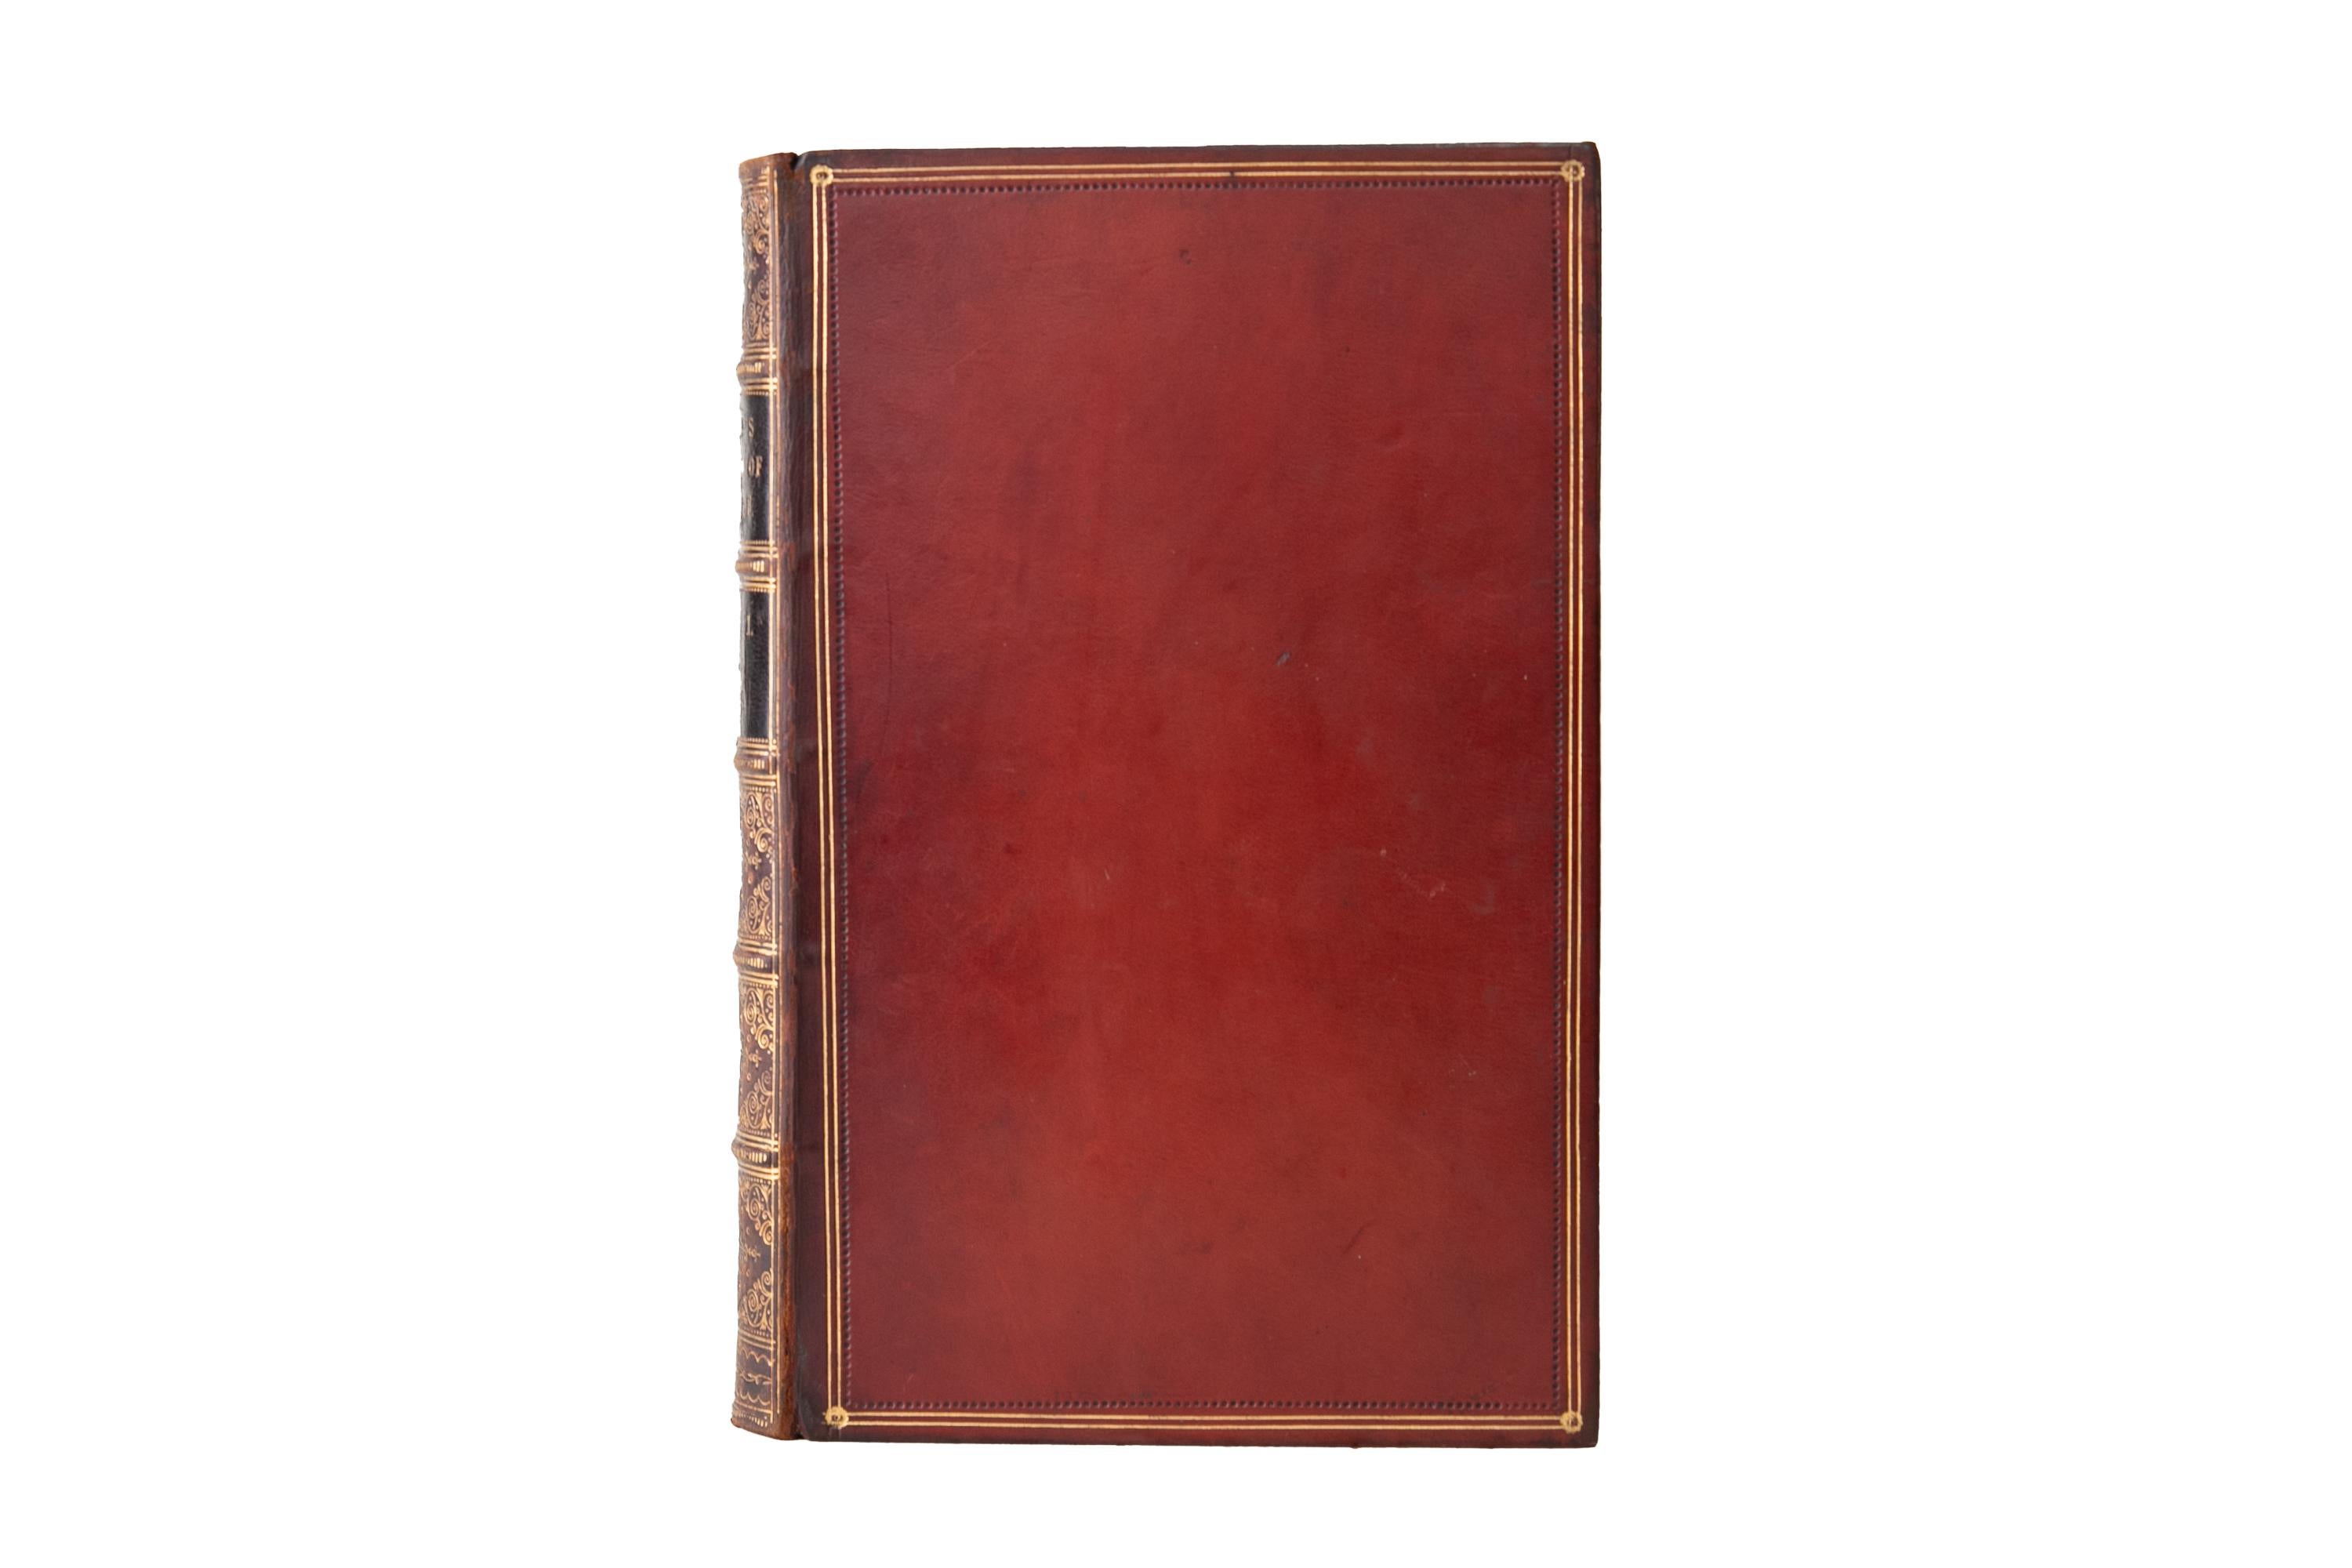 14 Volumes. Archibald Alison, History of Europe. Bound in full brown calf, covers and raised band spines gilt-tooled with black morocco labels. All edges marbled with marbled endpapers. Portraits. From the commencement of the French Revolution to